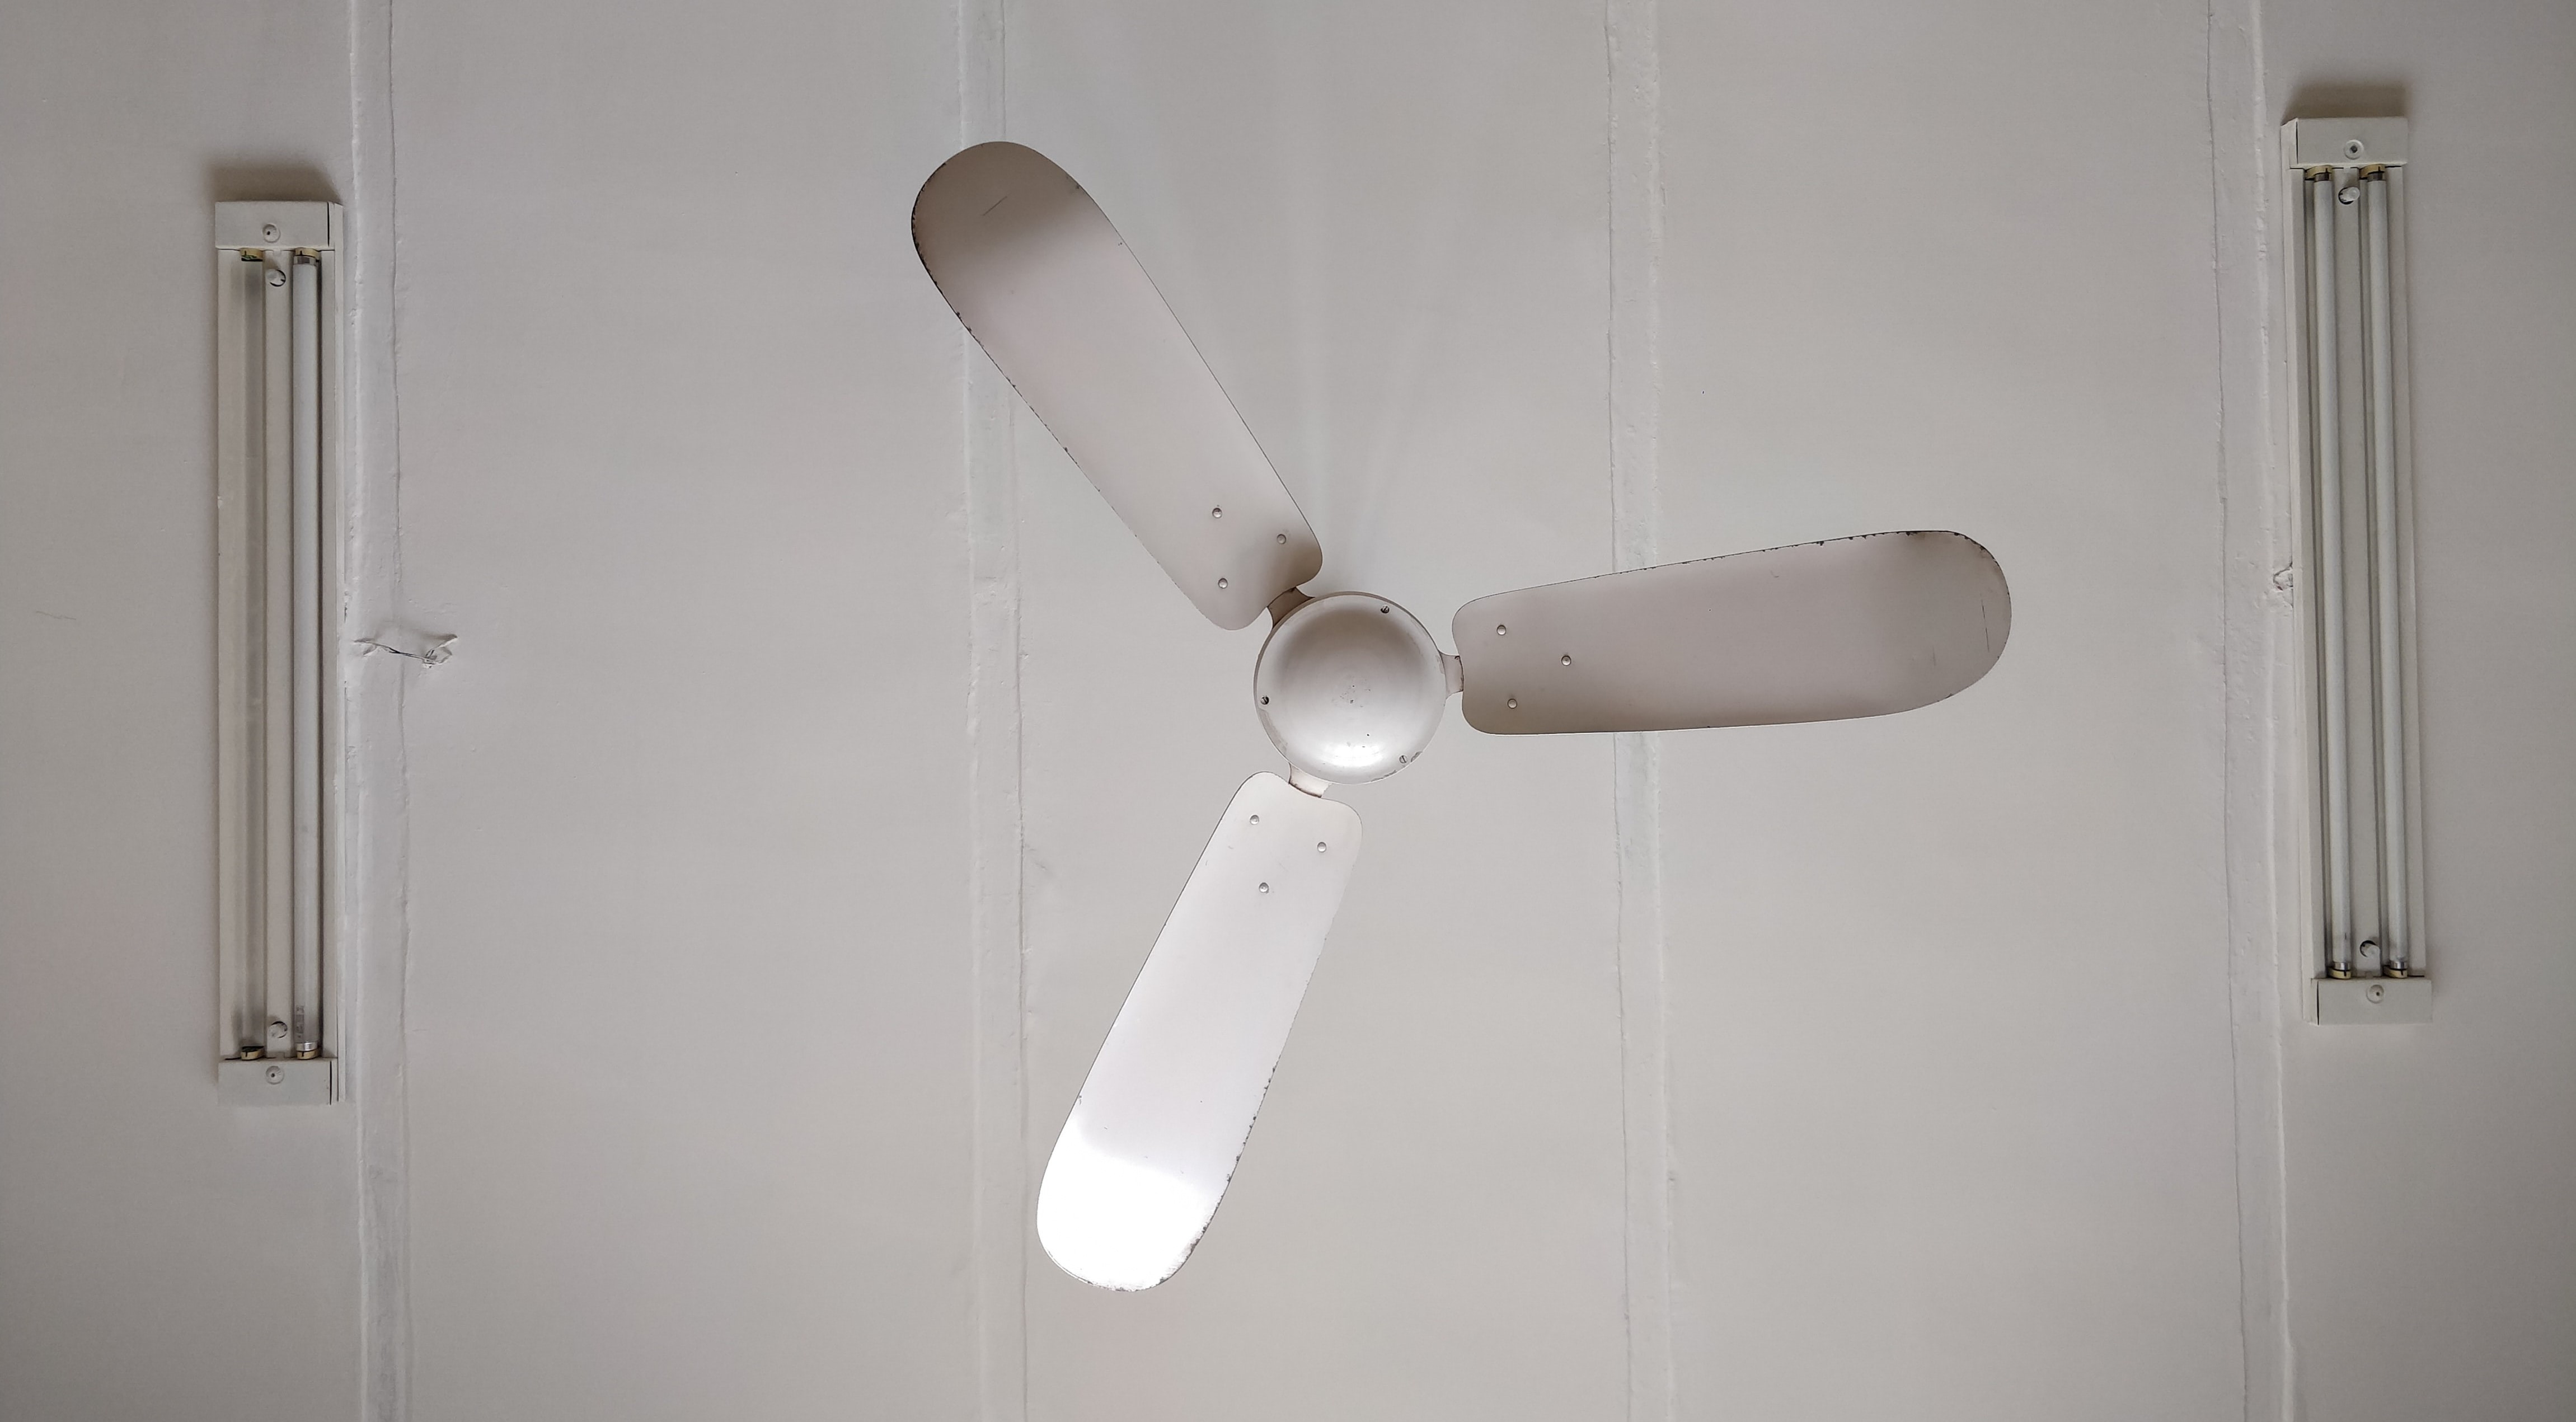 Flip your Fan to Cool for the Best Results's featured image